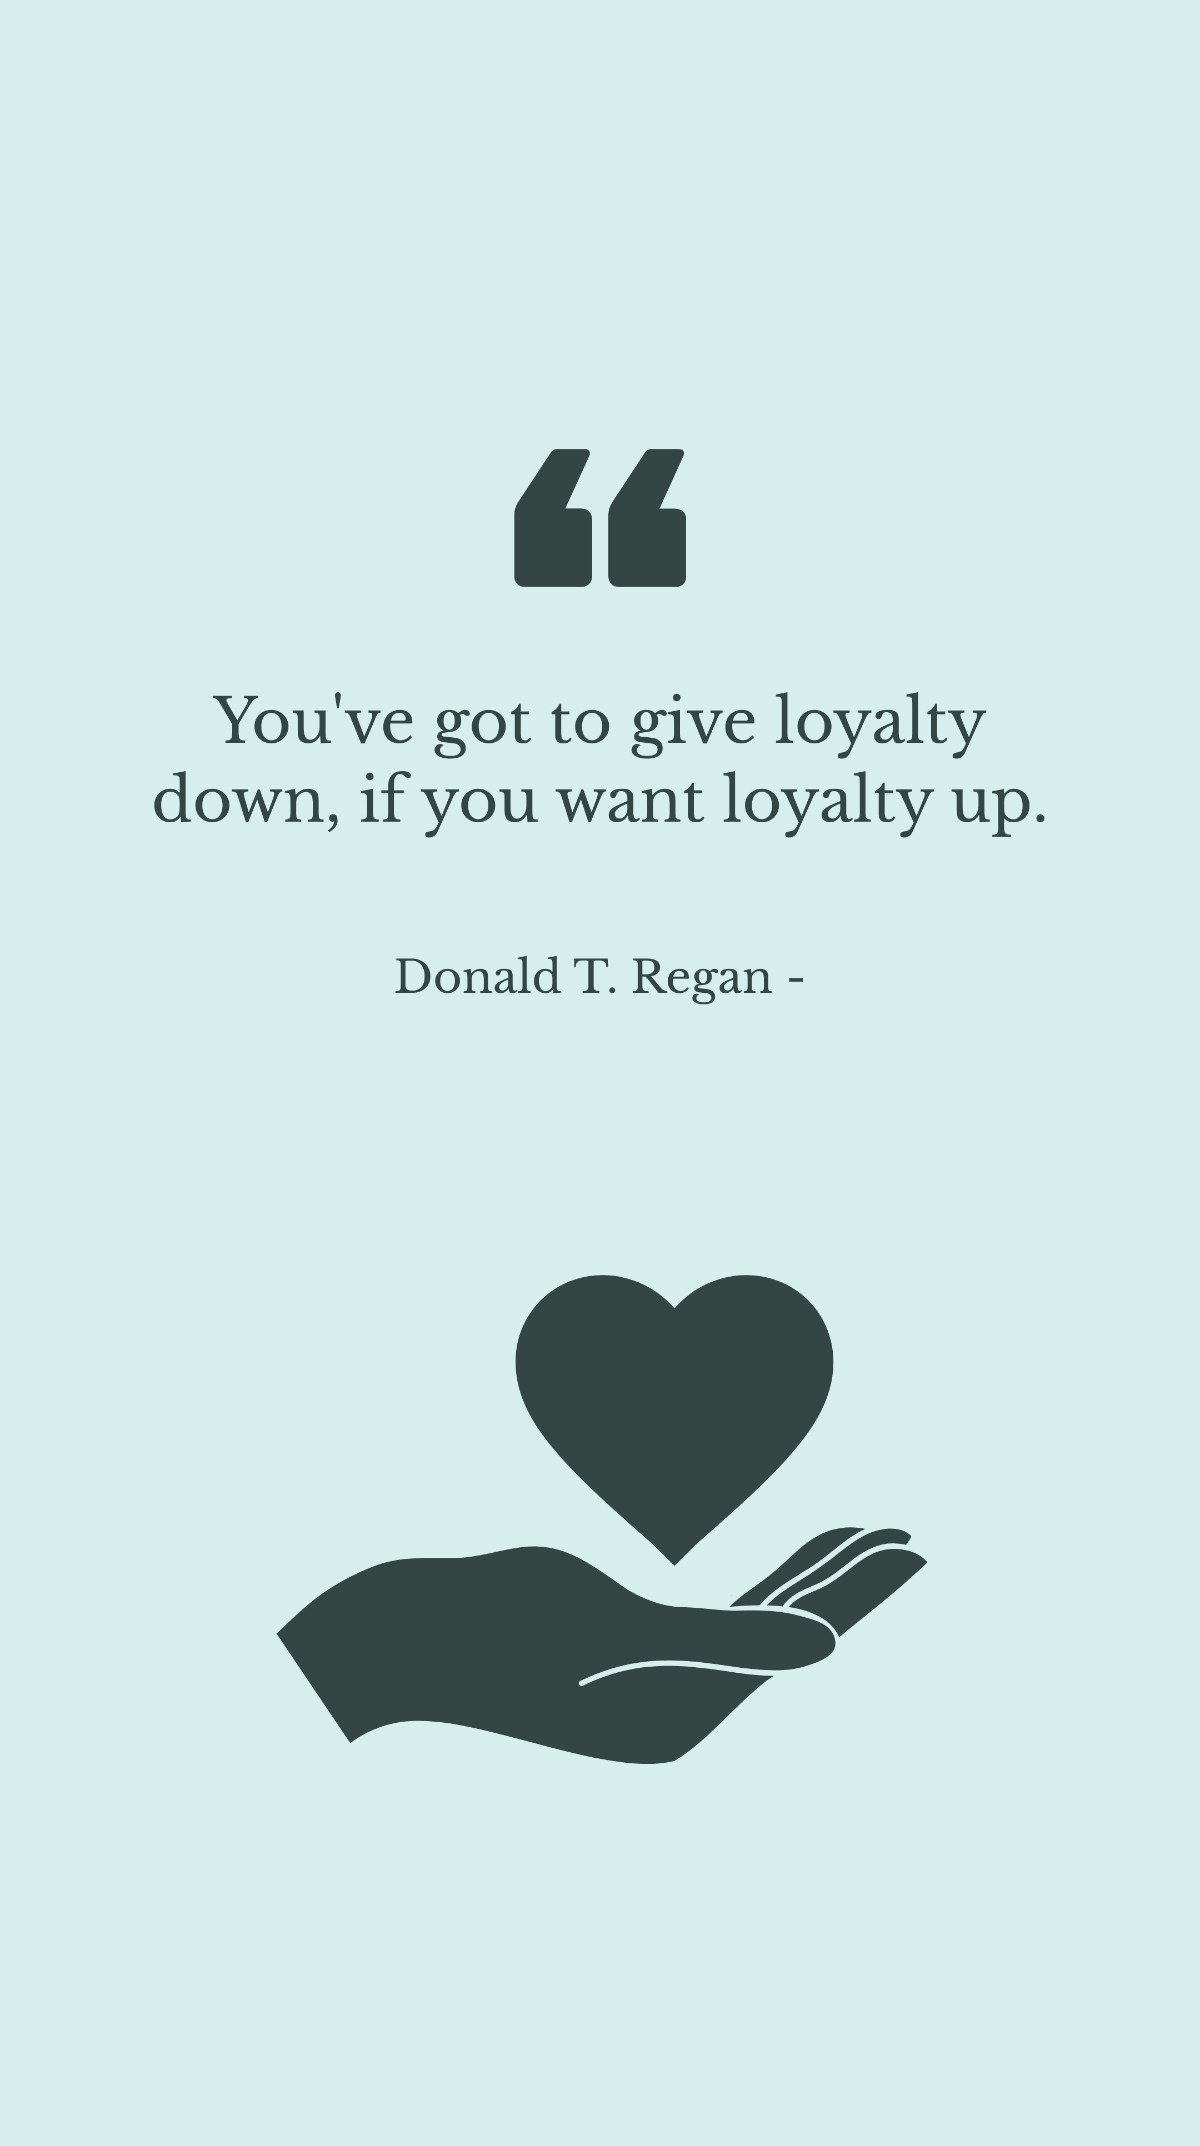 Free Donald T. Regan - You've got to give loyalty down, if you want loyalty up. Template